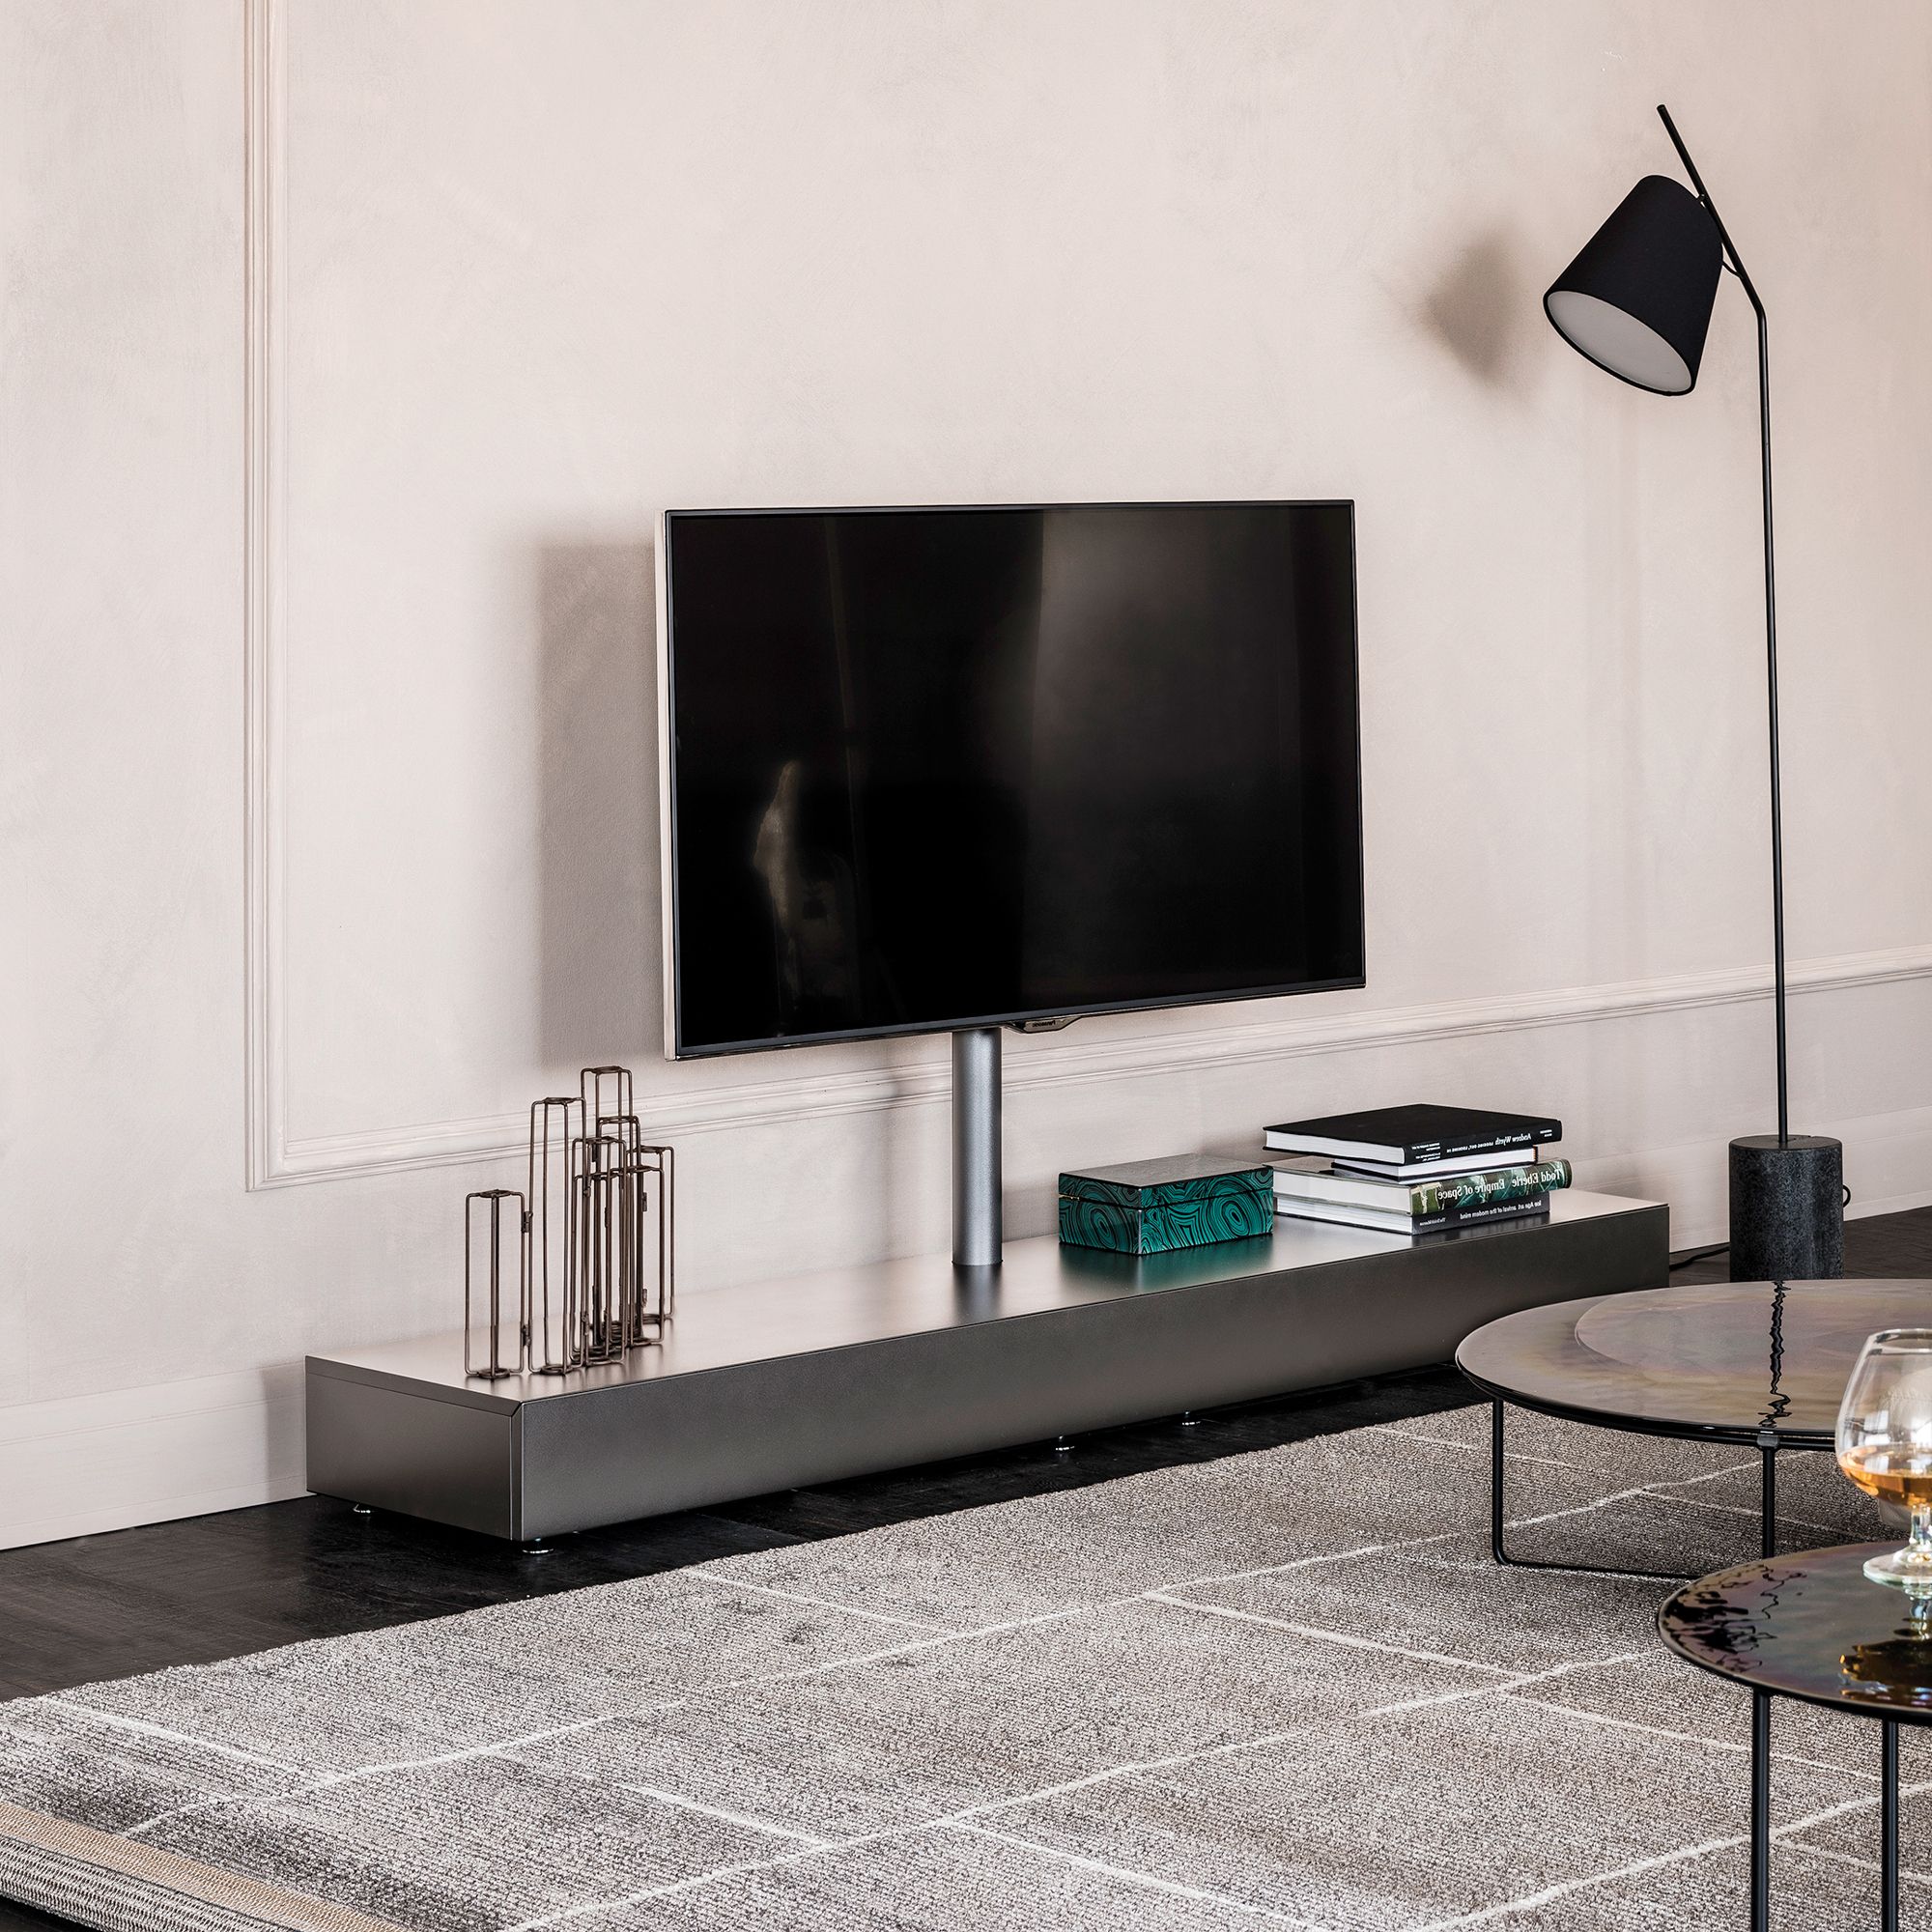 Luxury Italian Pixel Tv Stand – Italian Designer & Luxury Furniture Pertaining To Best And Newest Luxury Tv Stands (View 1 of 20)